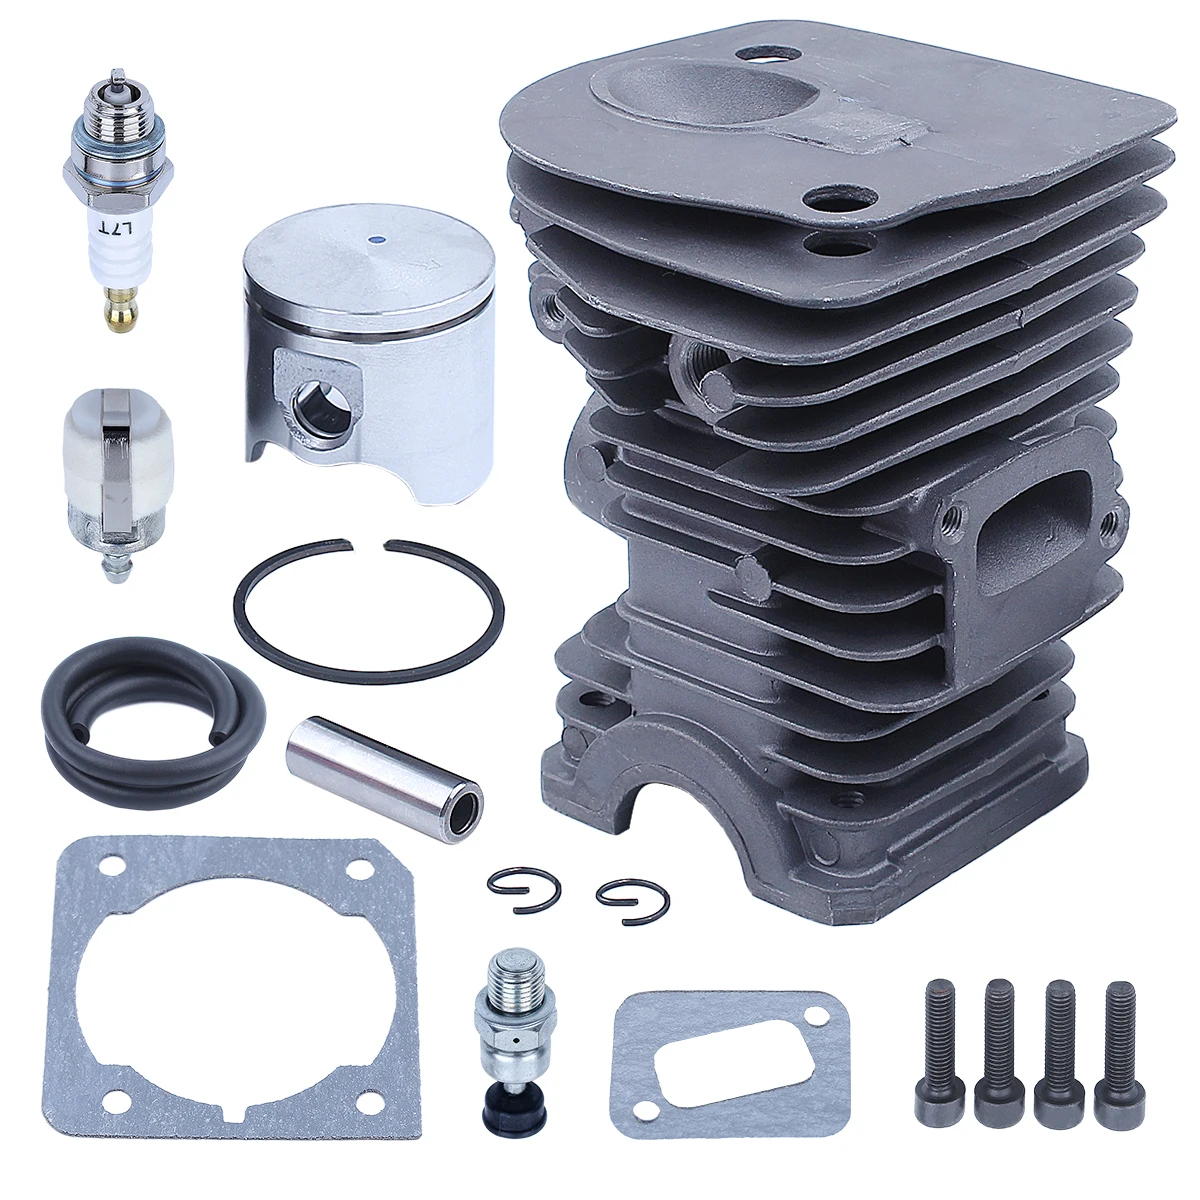 

40mm Cylinder Piston Kit For Husqvarna 340 345 Chainsaw Replace 503870276 w Decompression Valve Gaskets Fuel Filter бензопила